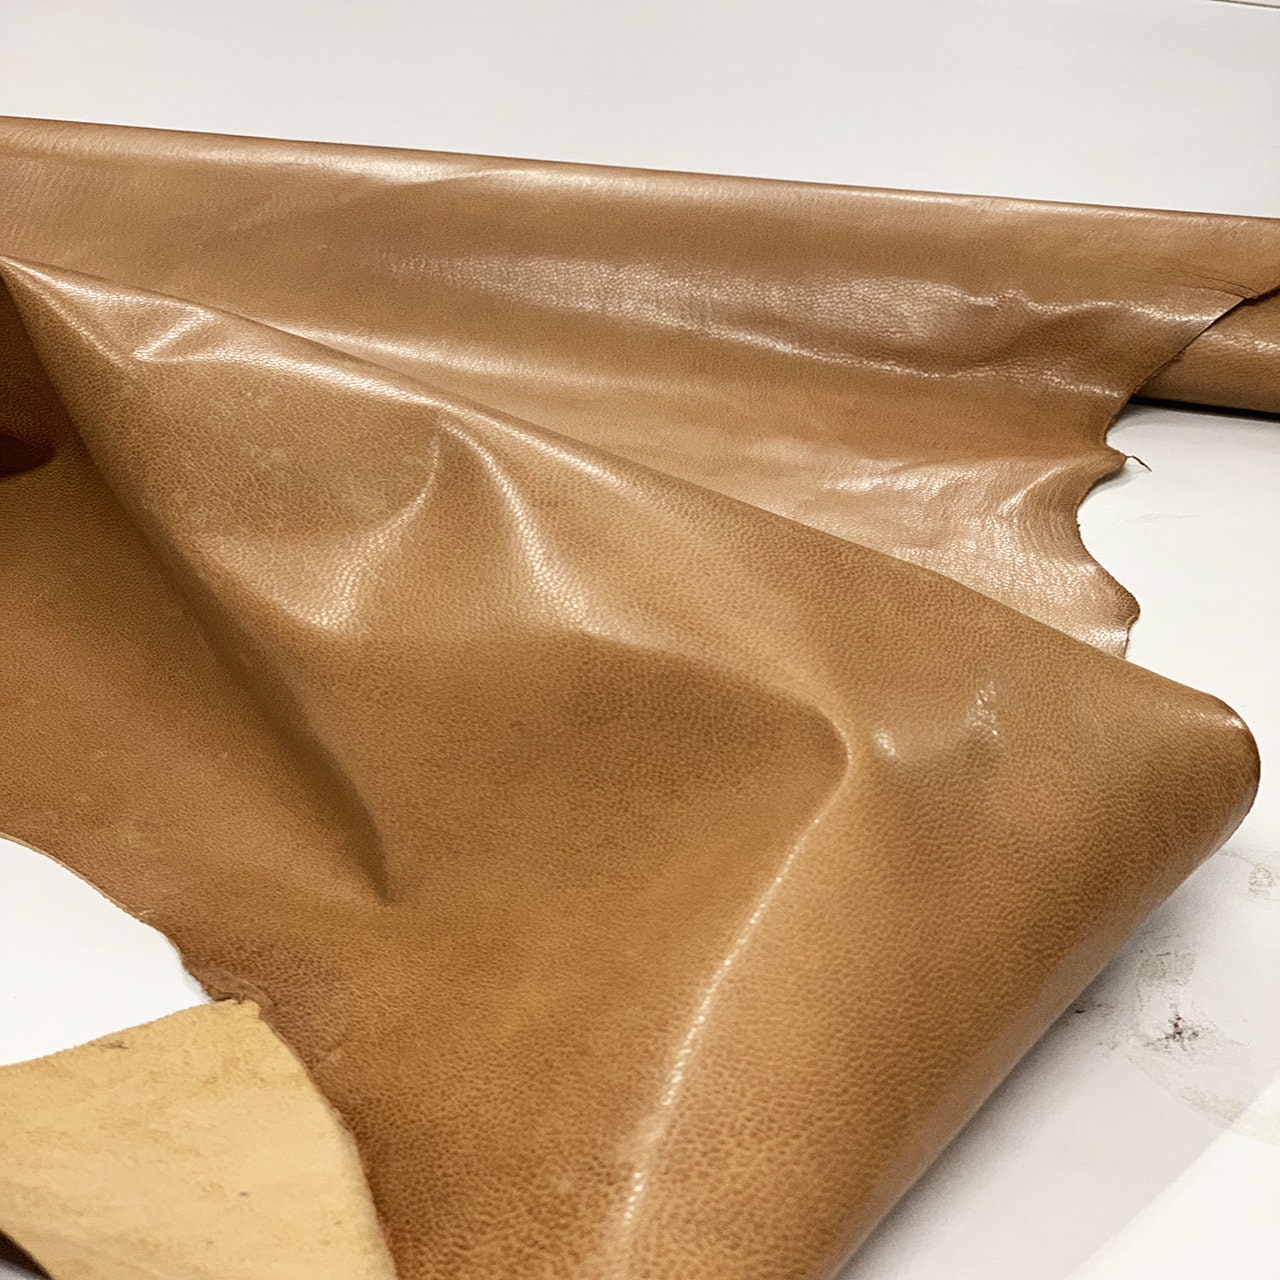 Natural Veg Tanned leather 1.2mm(3oz) for Belts, Sandals, Handbags, Straps,  Leather lining, Vegetable tanned goatskin, Genuine leather